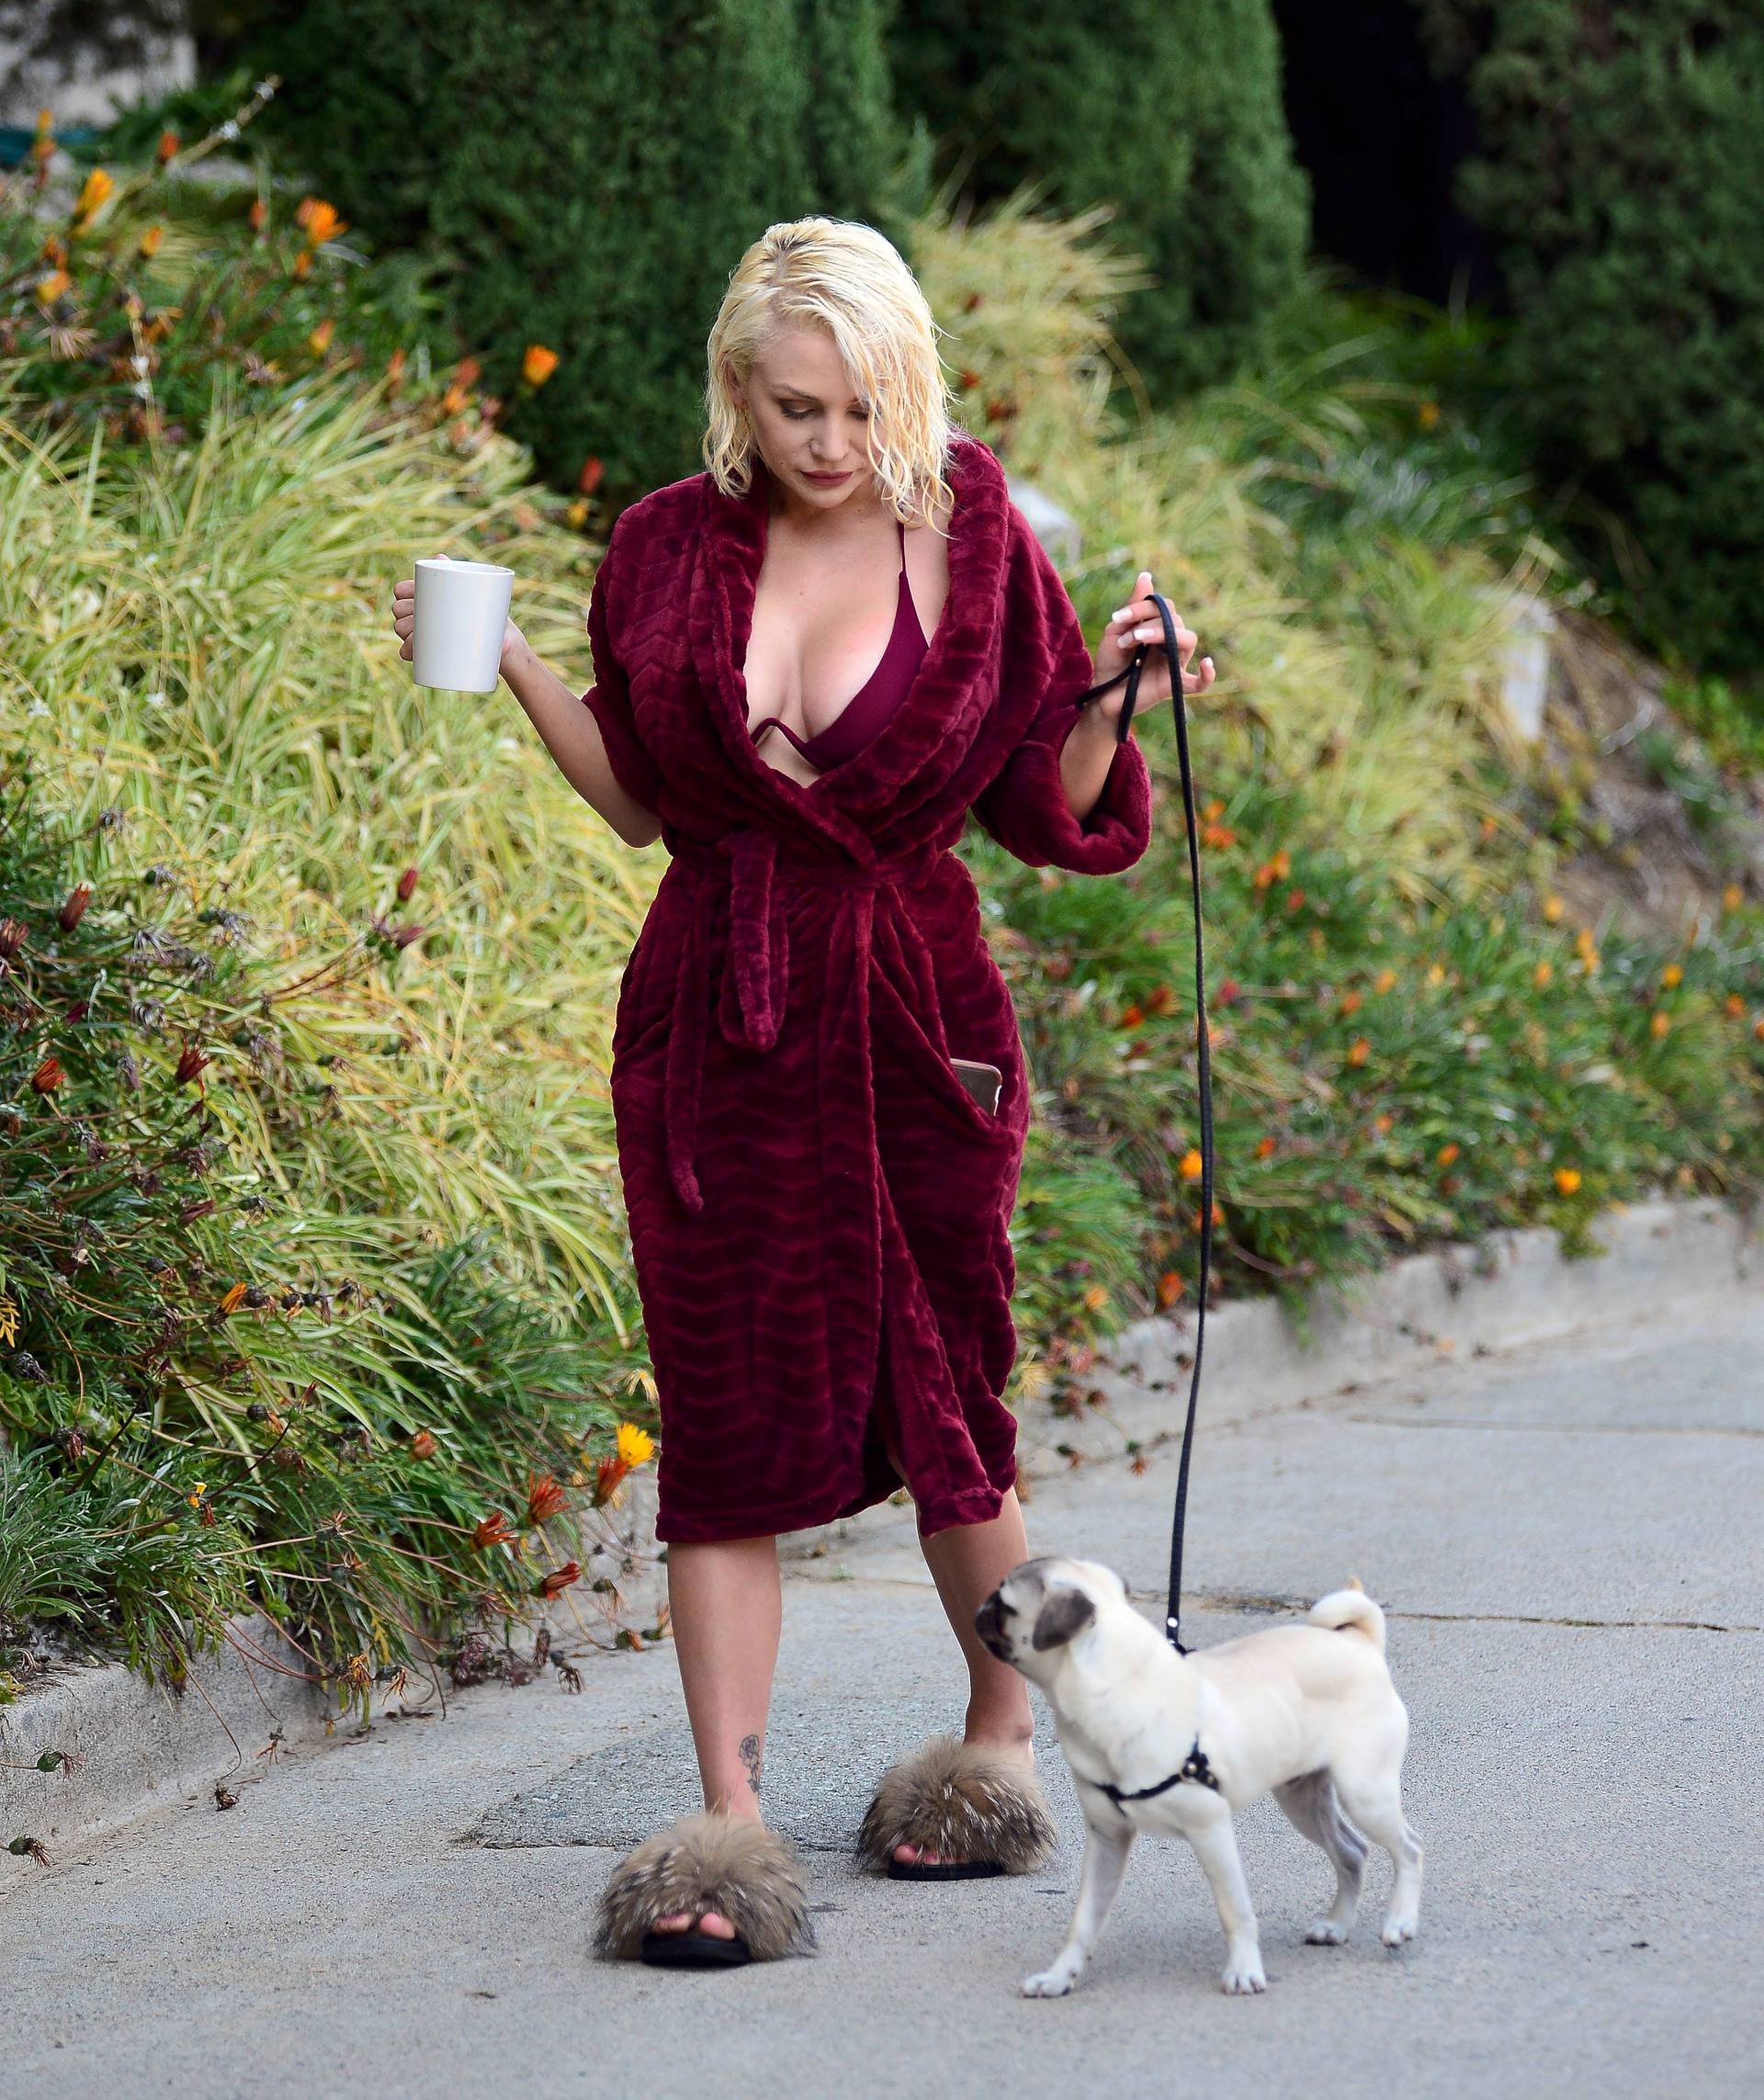 Courtney Stodden Sexy Boobs In Risque Robe Out In Los Angeles 0018